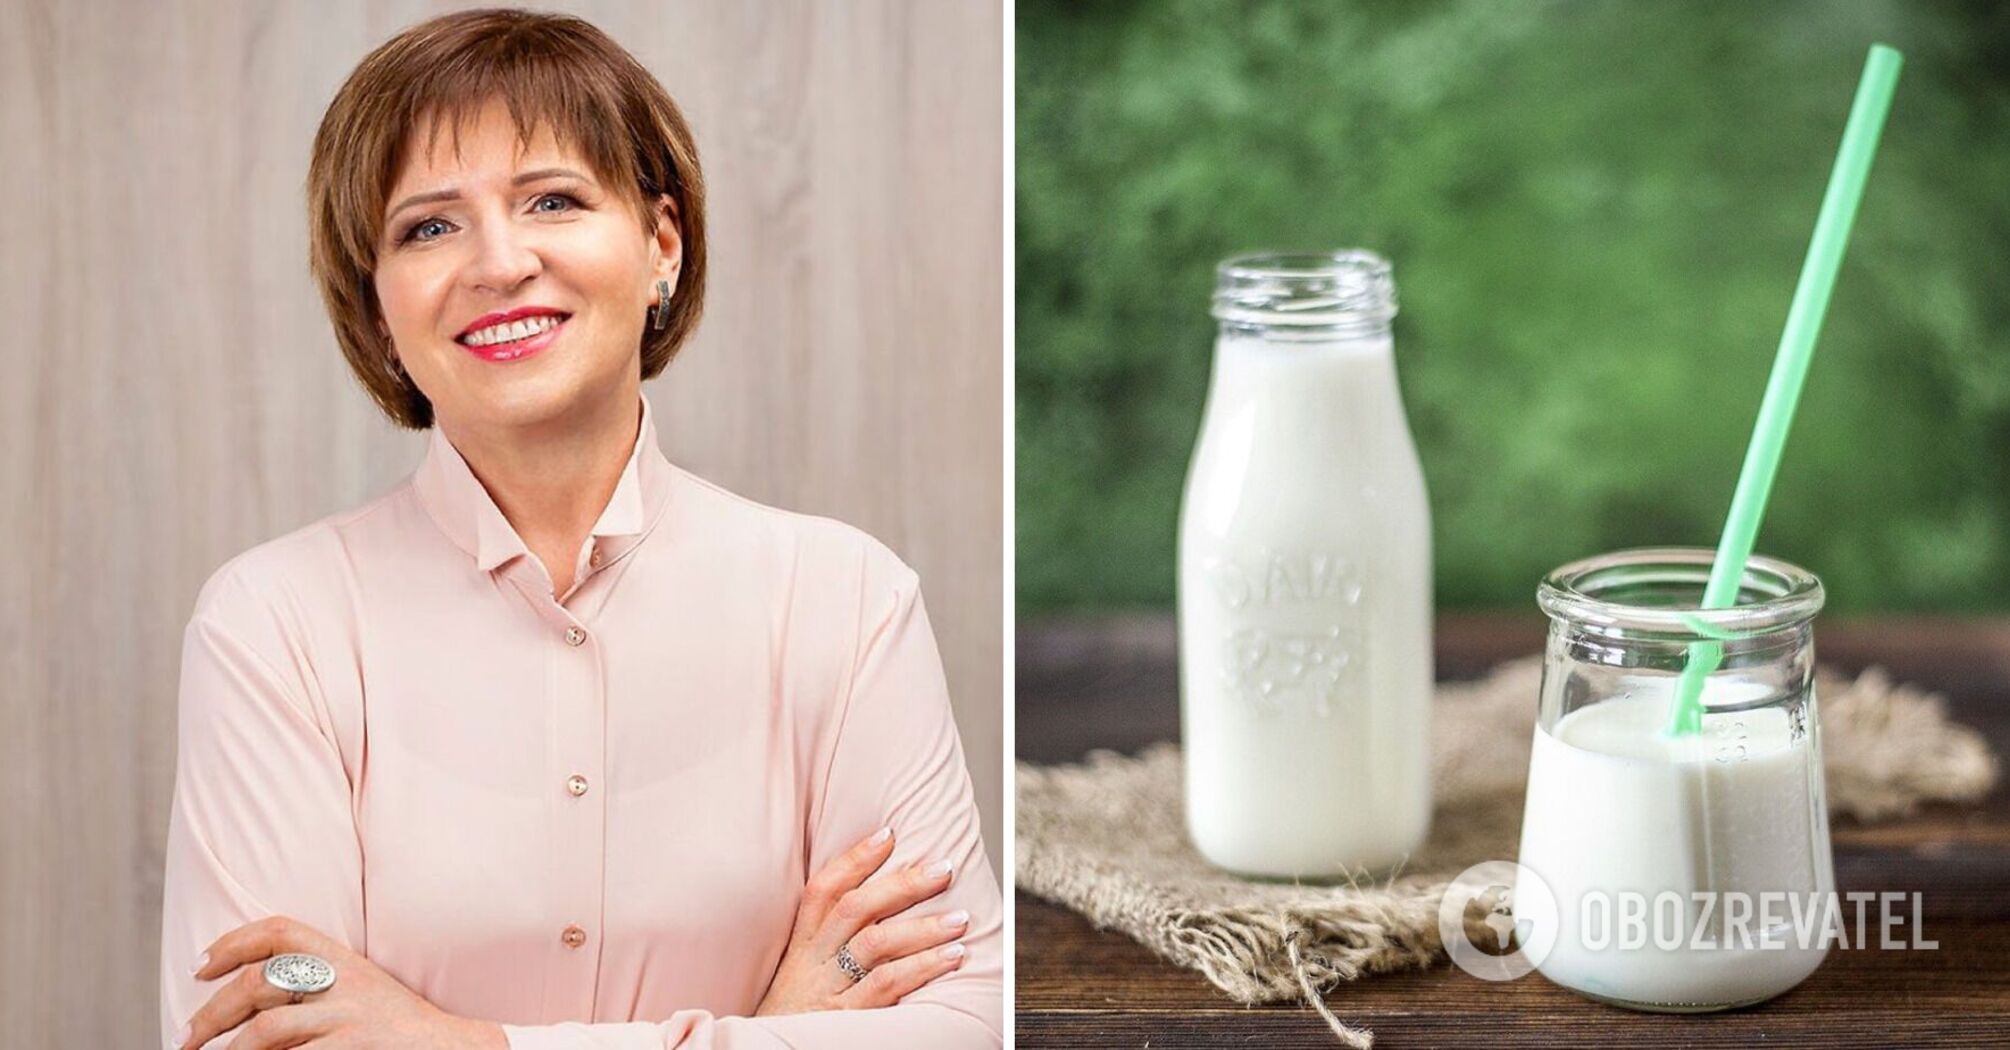 Svitlana Fus told all about the benefits of plant milk